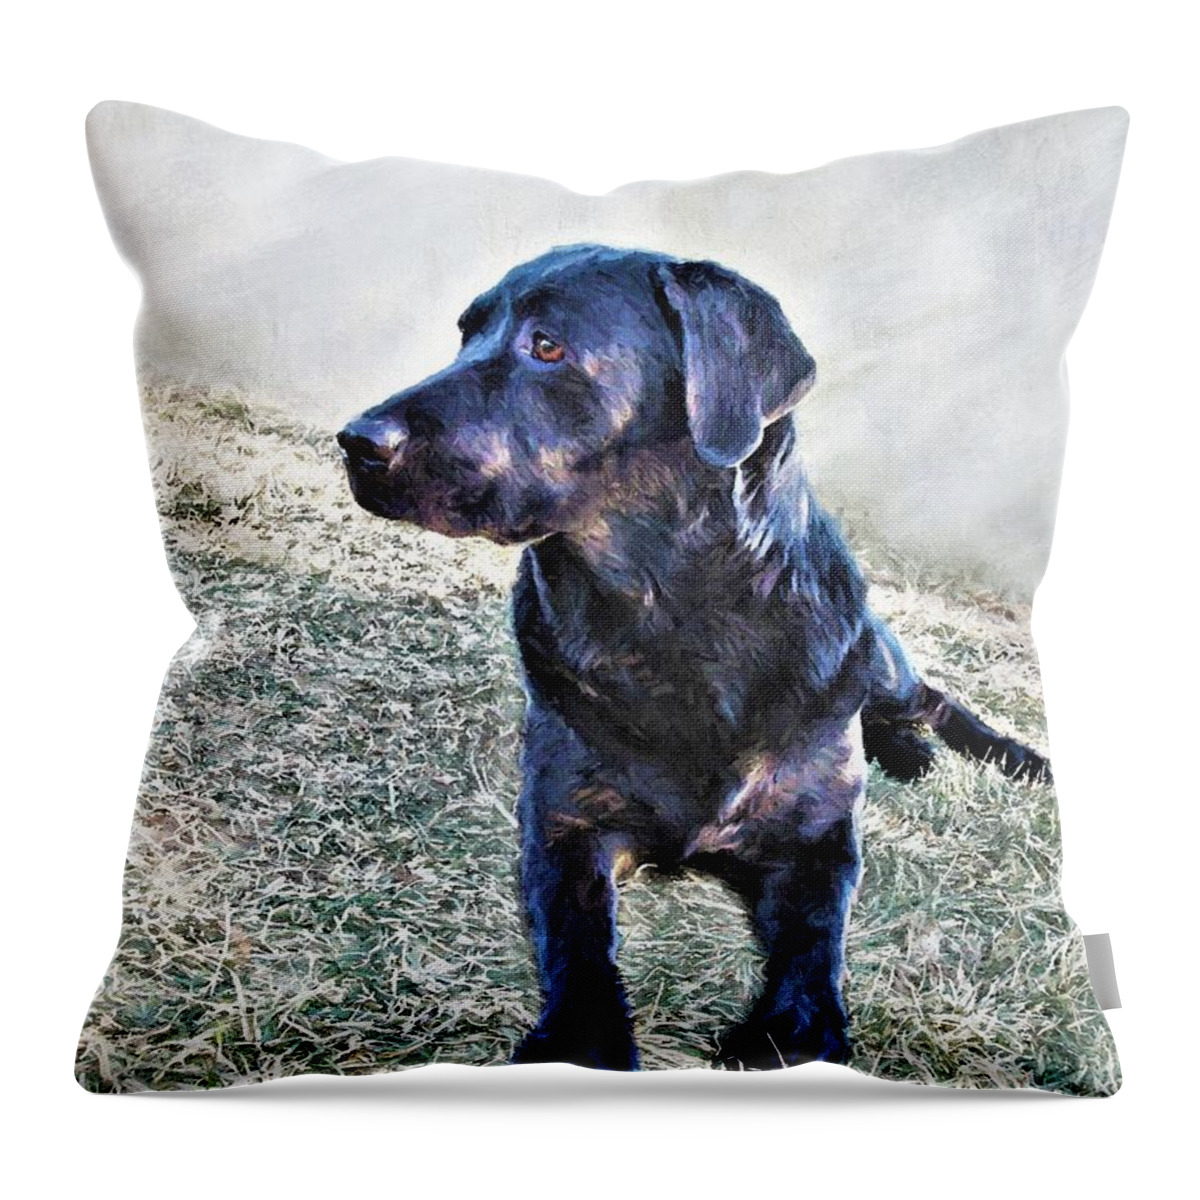 Dog Throw Pillow featuring the painting Black Labrador Retriever - Daisy by Diane Chandler